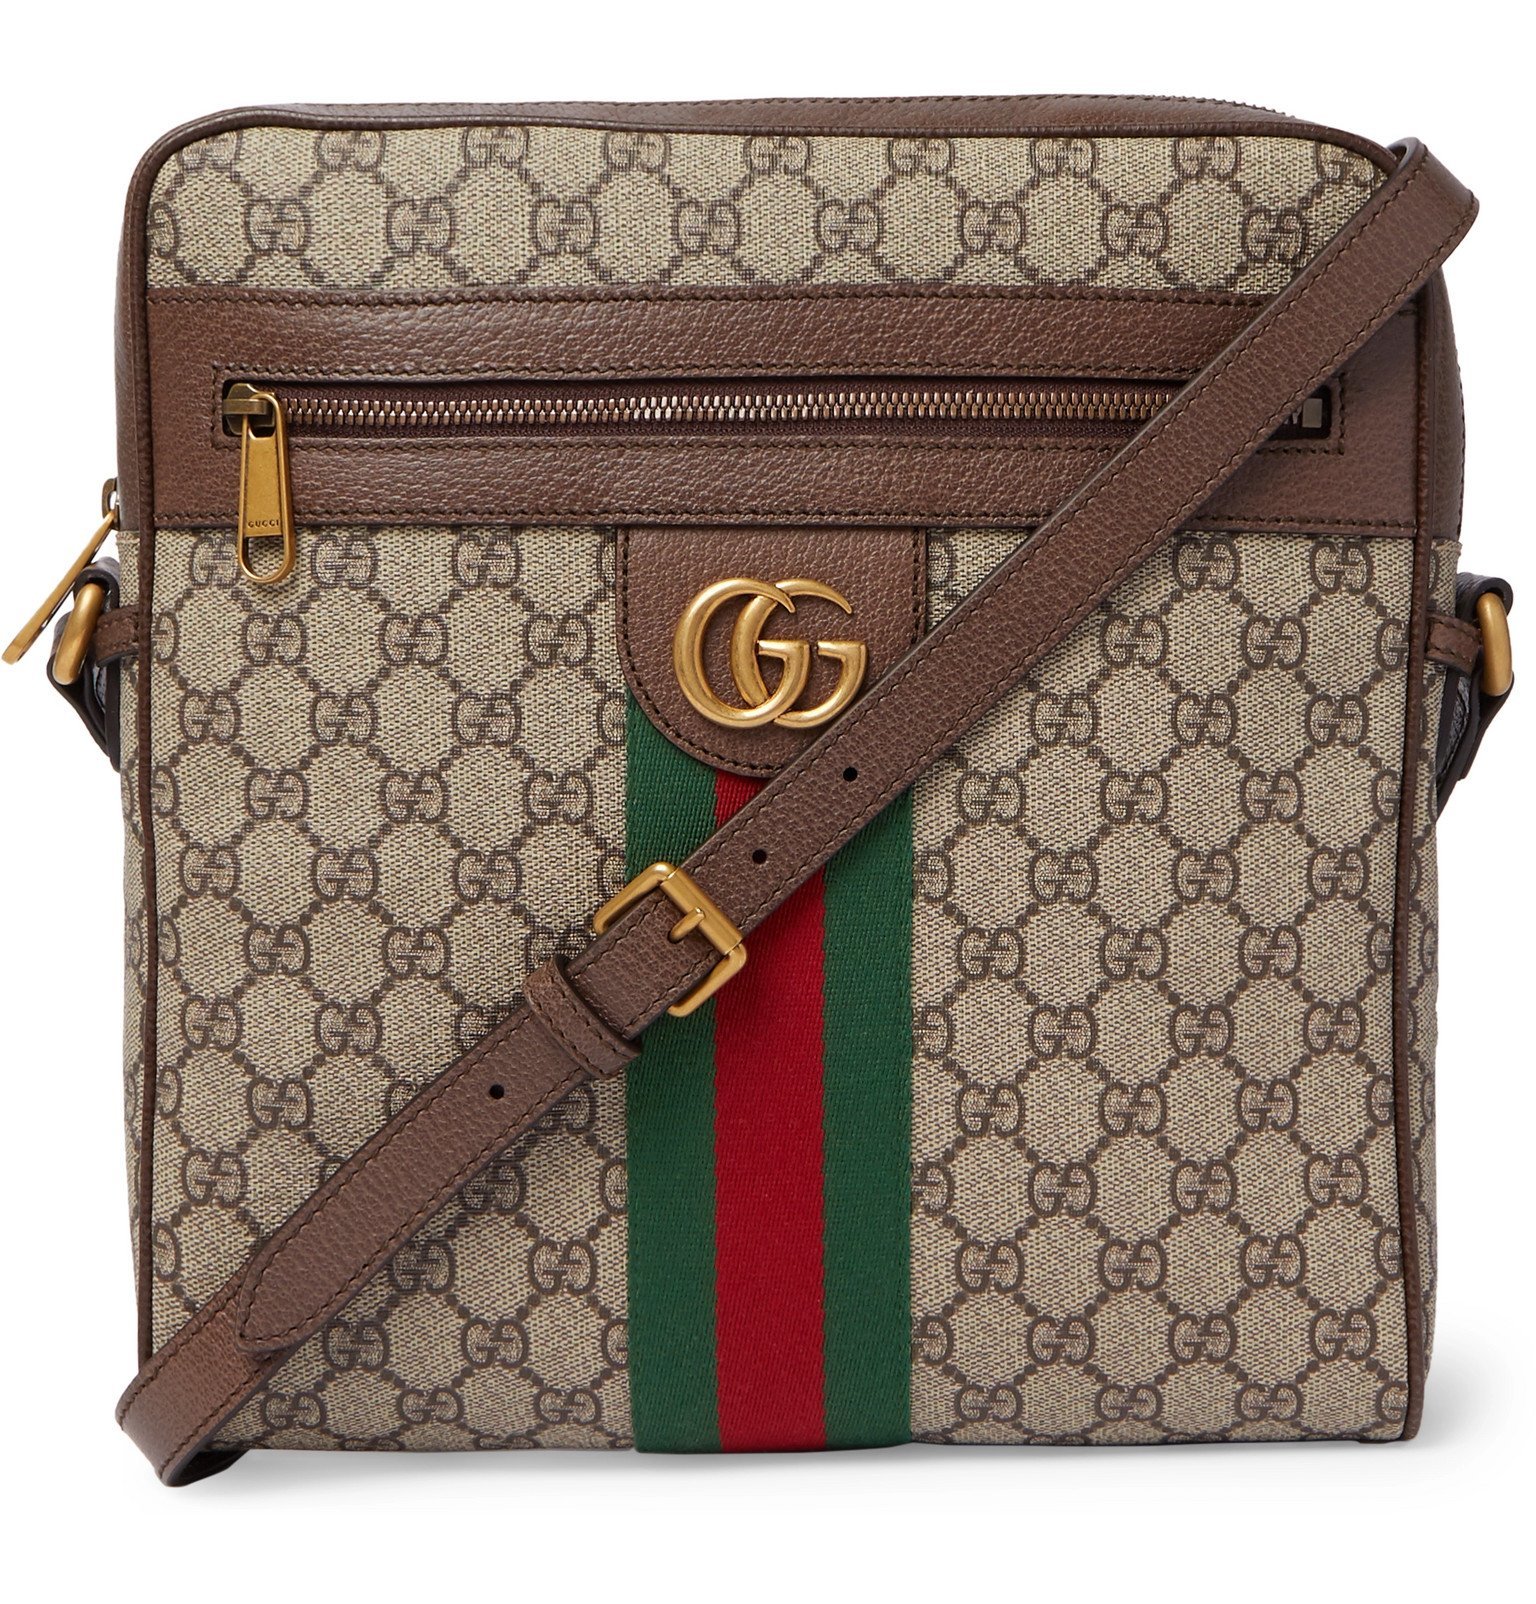 Gucci - Ophidia Medium Leather-Trimmed Monogrammed Coated-Canvas ...